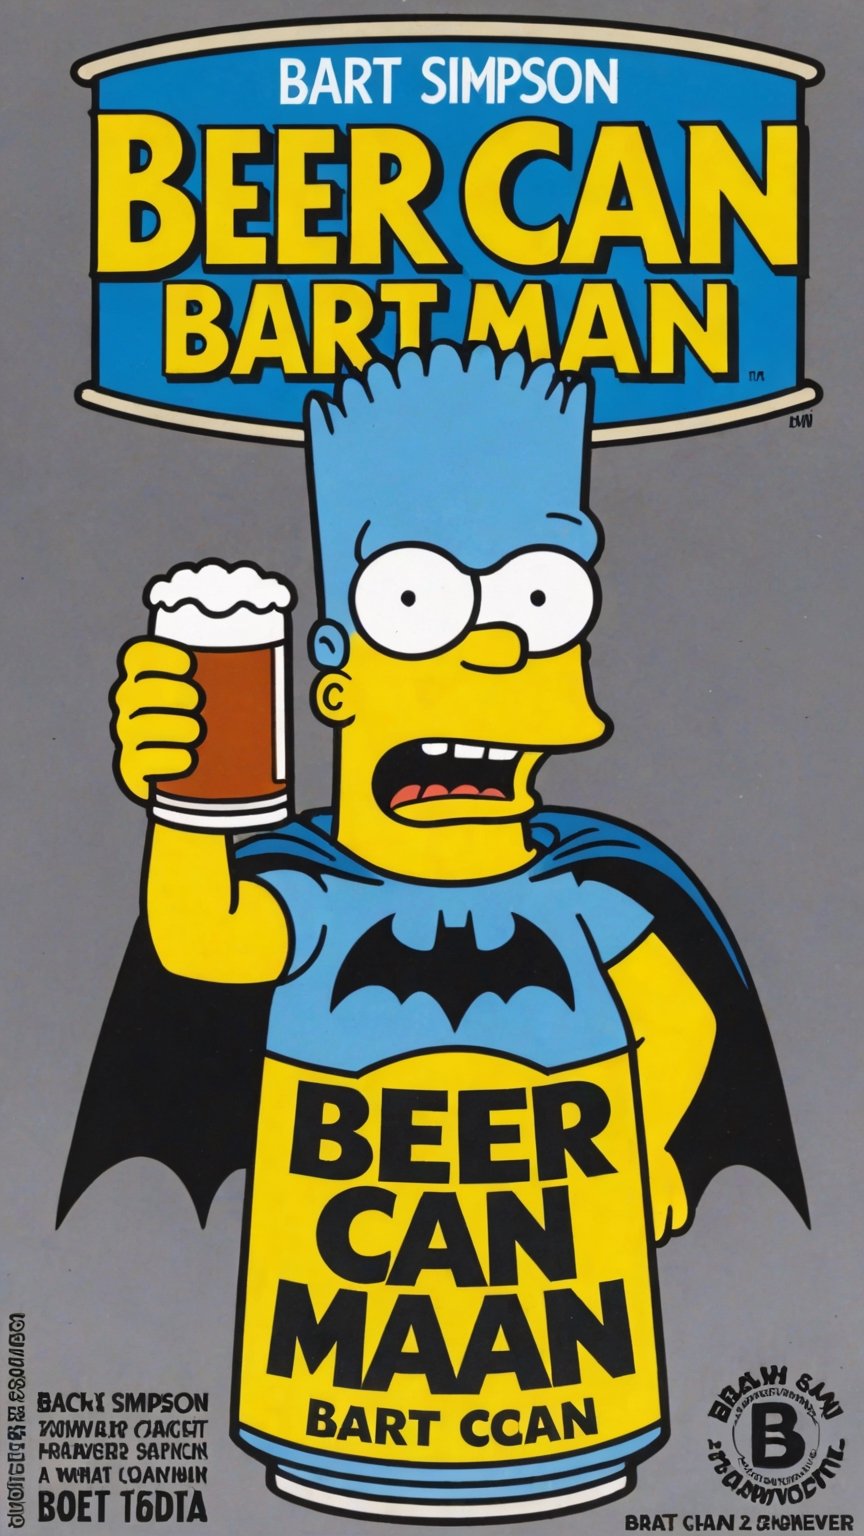 Photo of Bart Simpson as batman in beer can with text that says "Beer can Bart man"